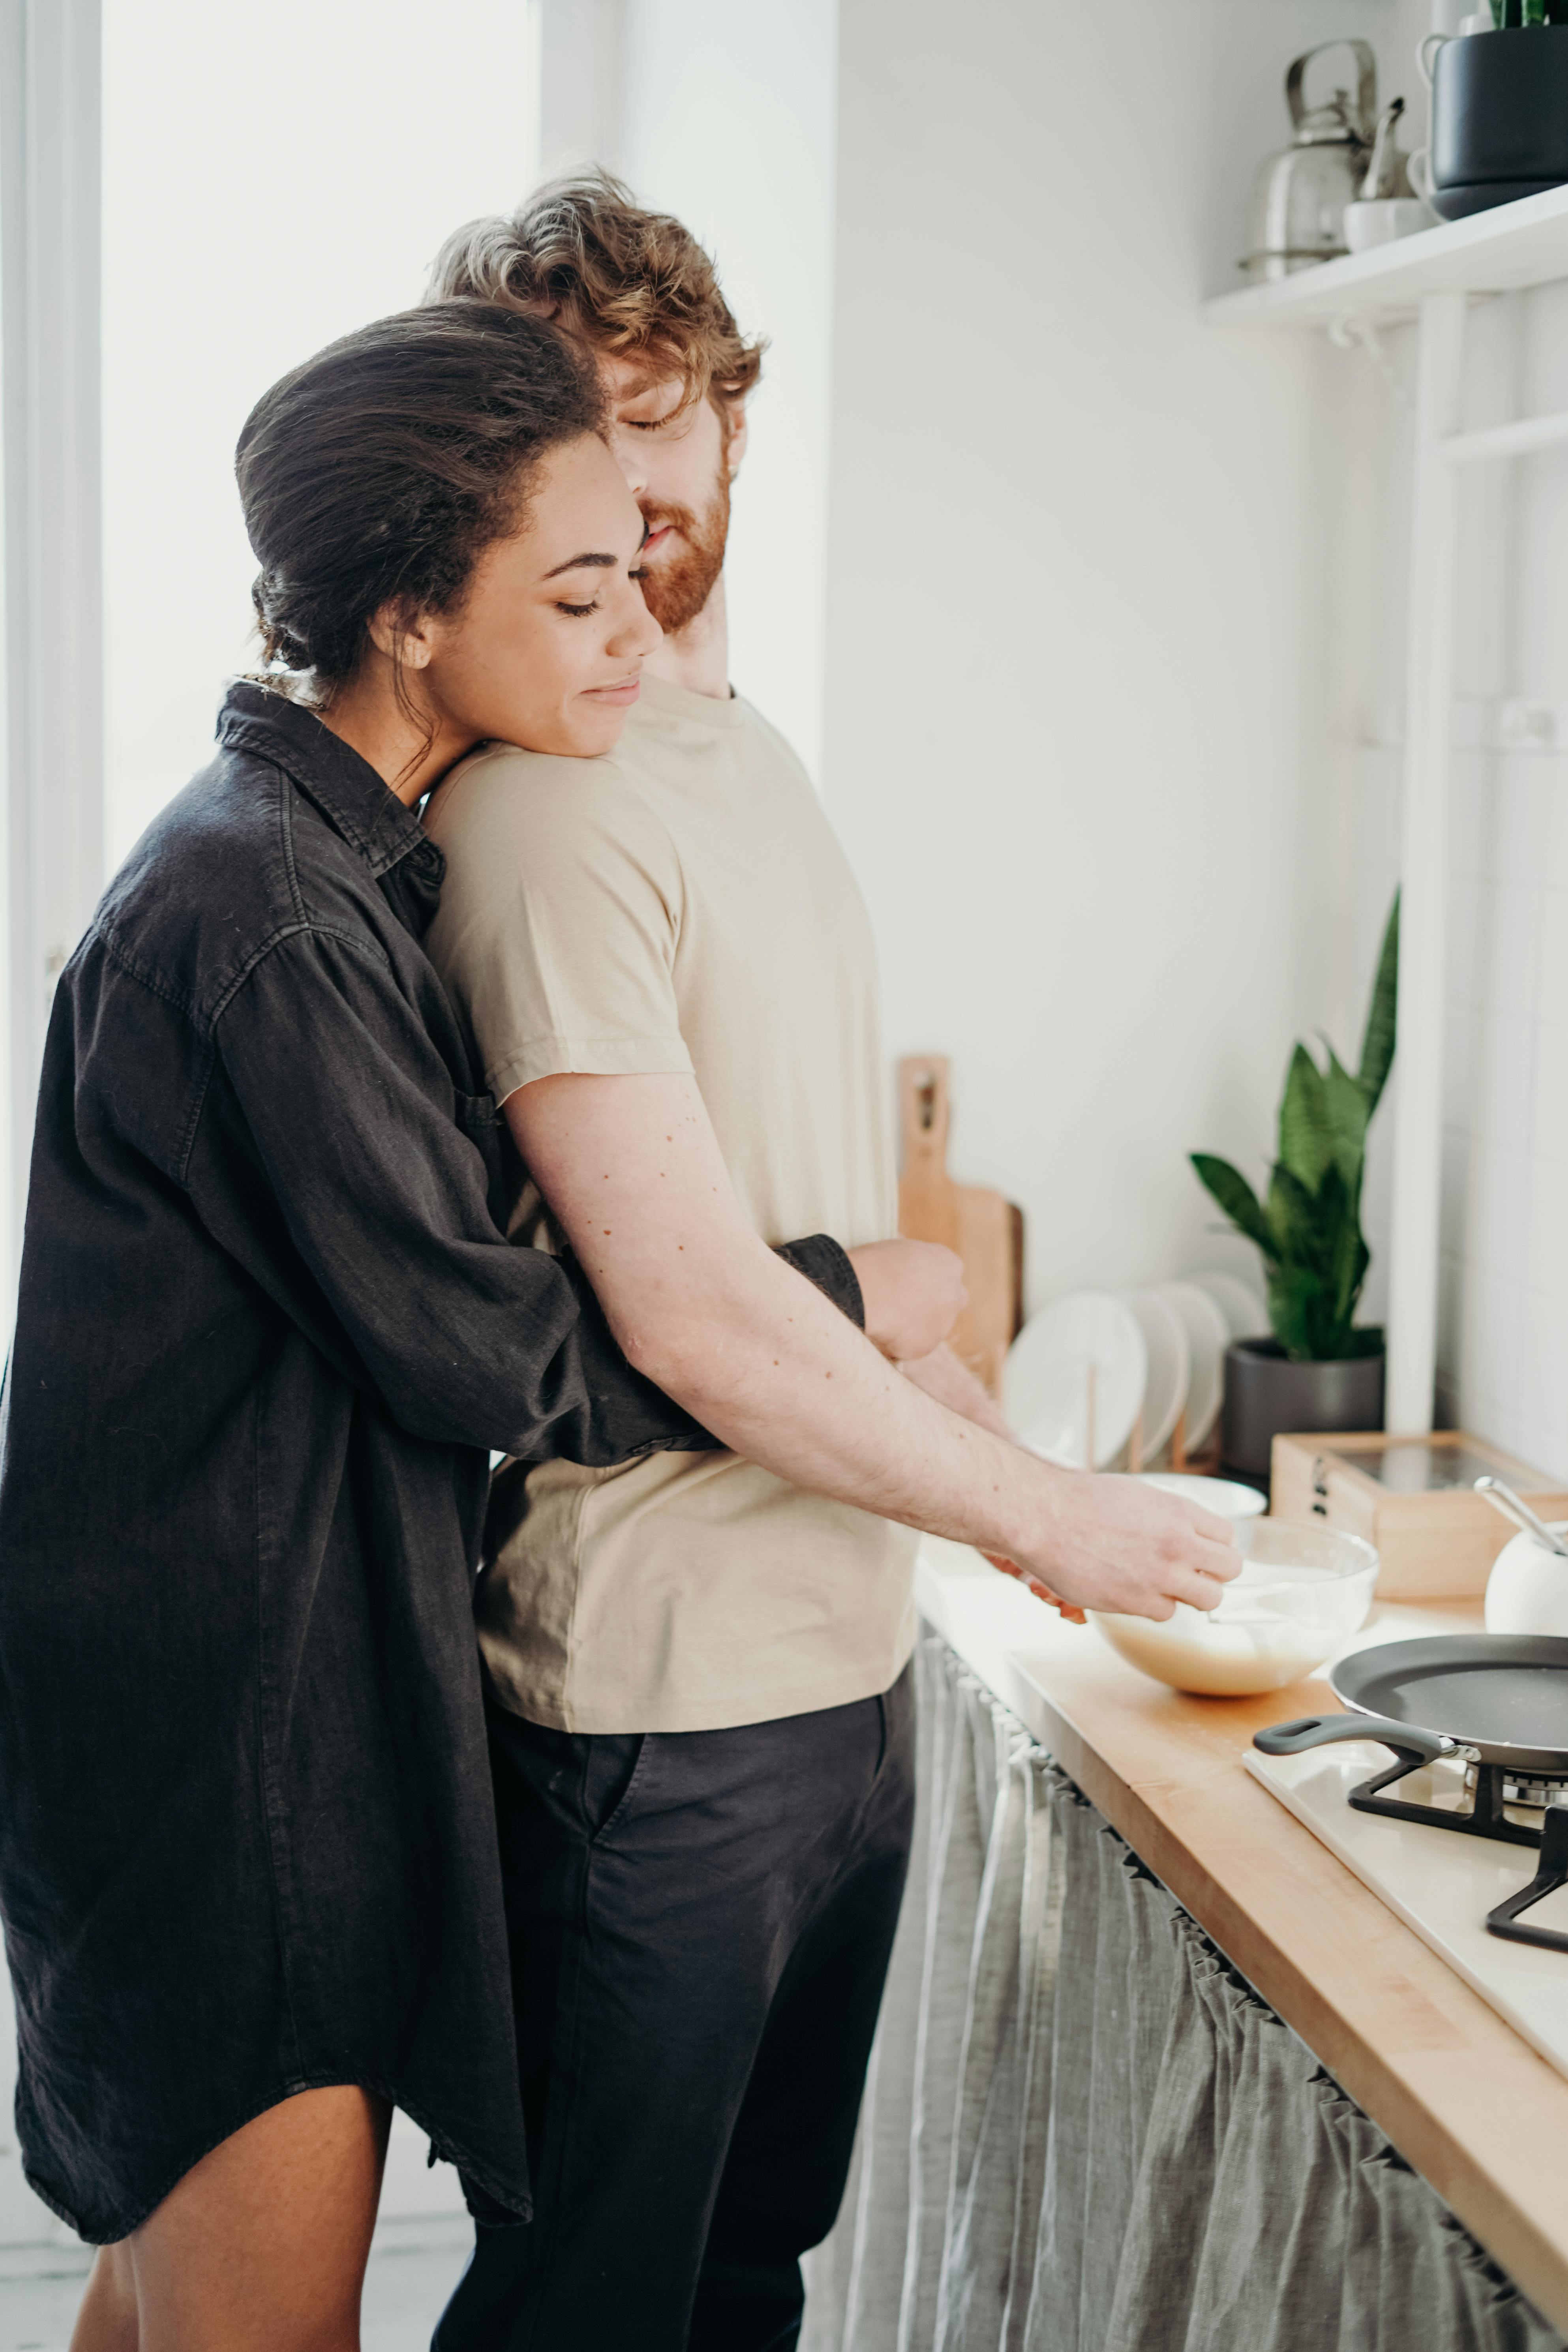 A couple embracing while the man prepares a meal | Source: Pexels